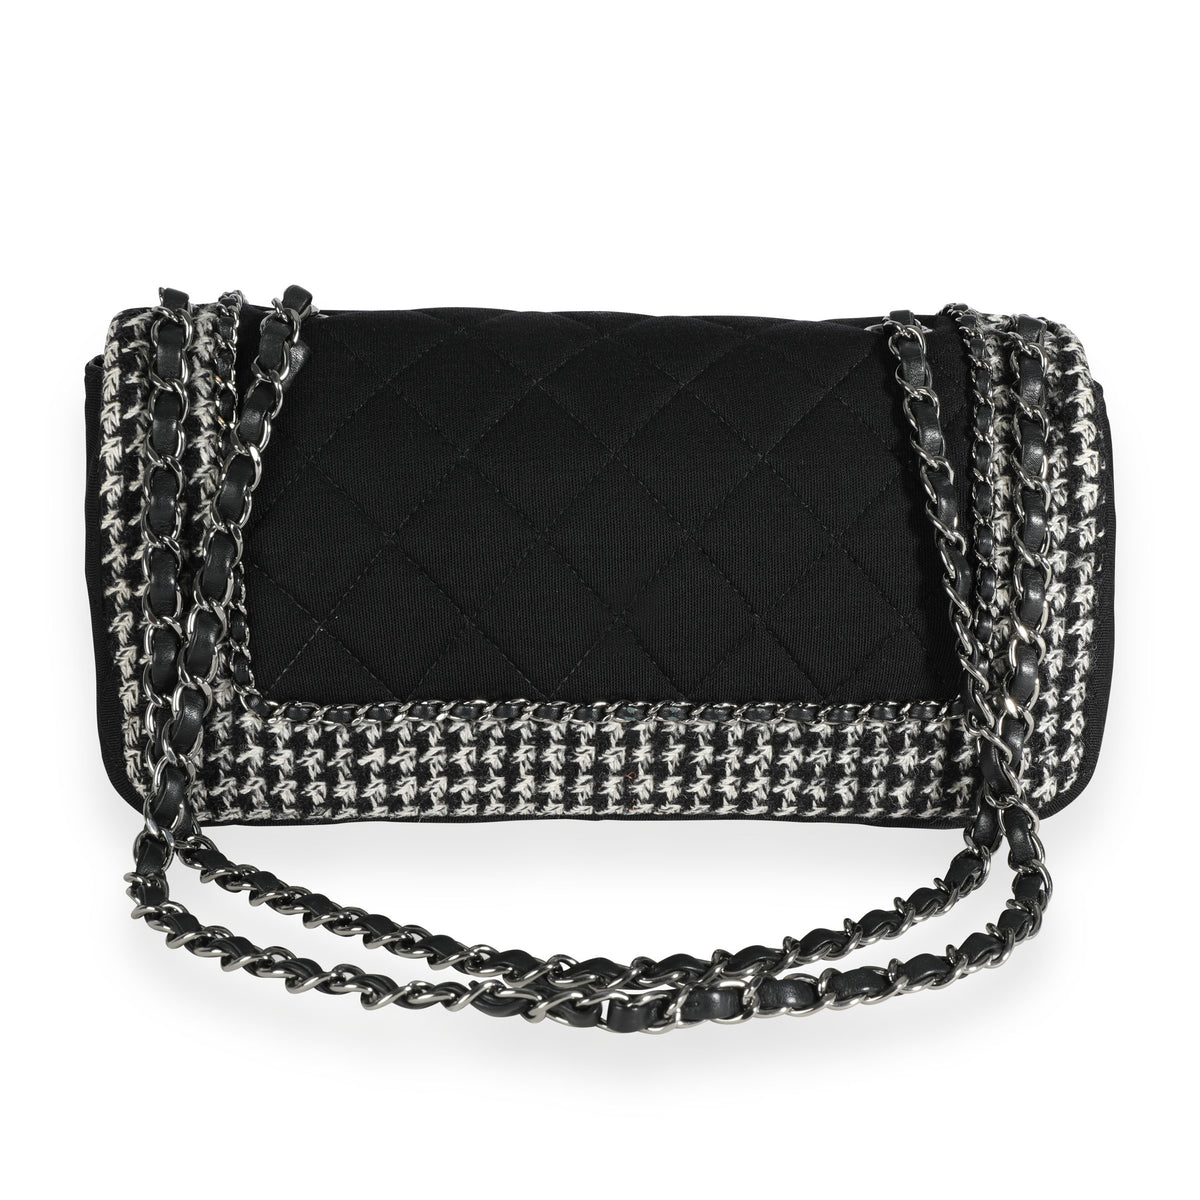 Chanel Black & White Jersey and Houndstooth Boucle Single Flap Bag